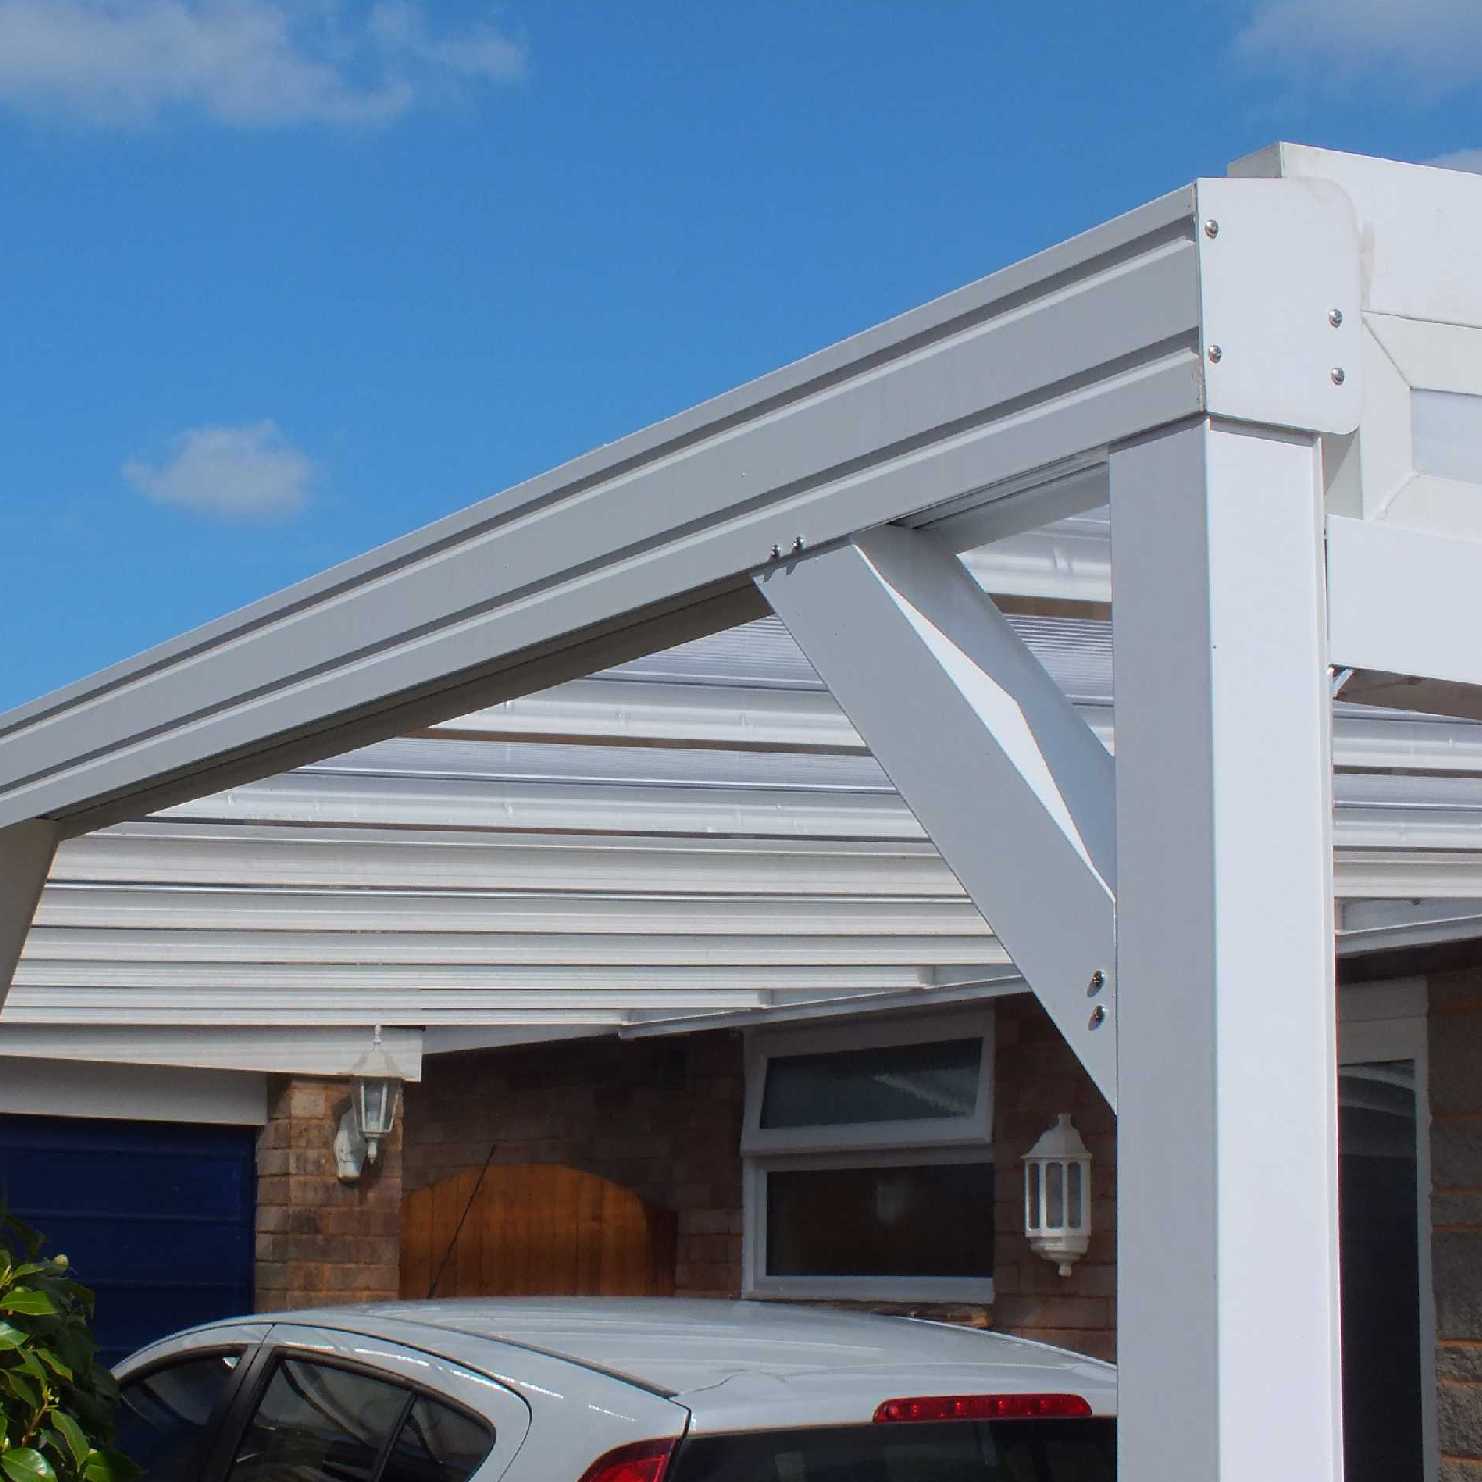 Buy Omega Smart Lean-To Canopy, White with 16mm Polycarbonate Glazing - 11.2m (W) x 4.5m (P), (5) Supporting Posts online today